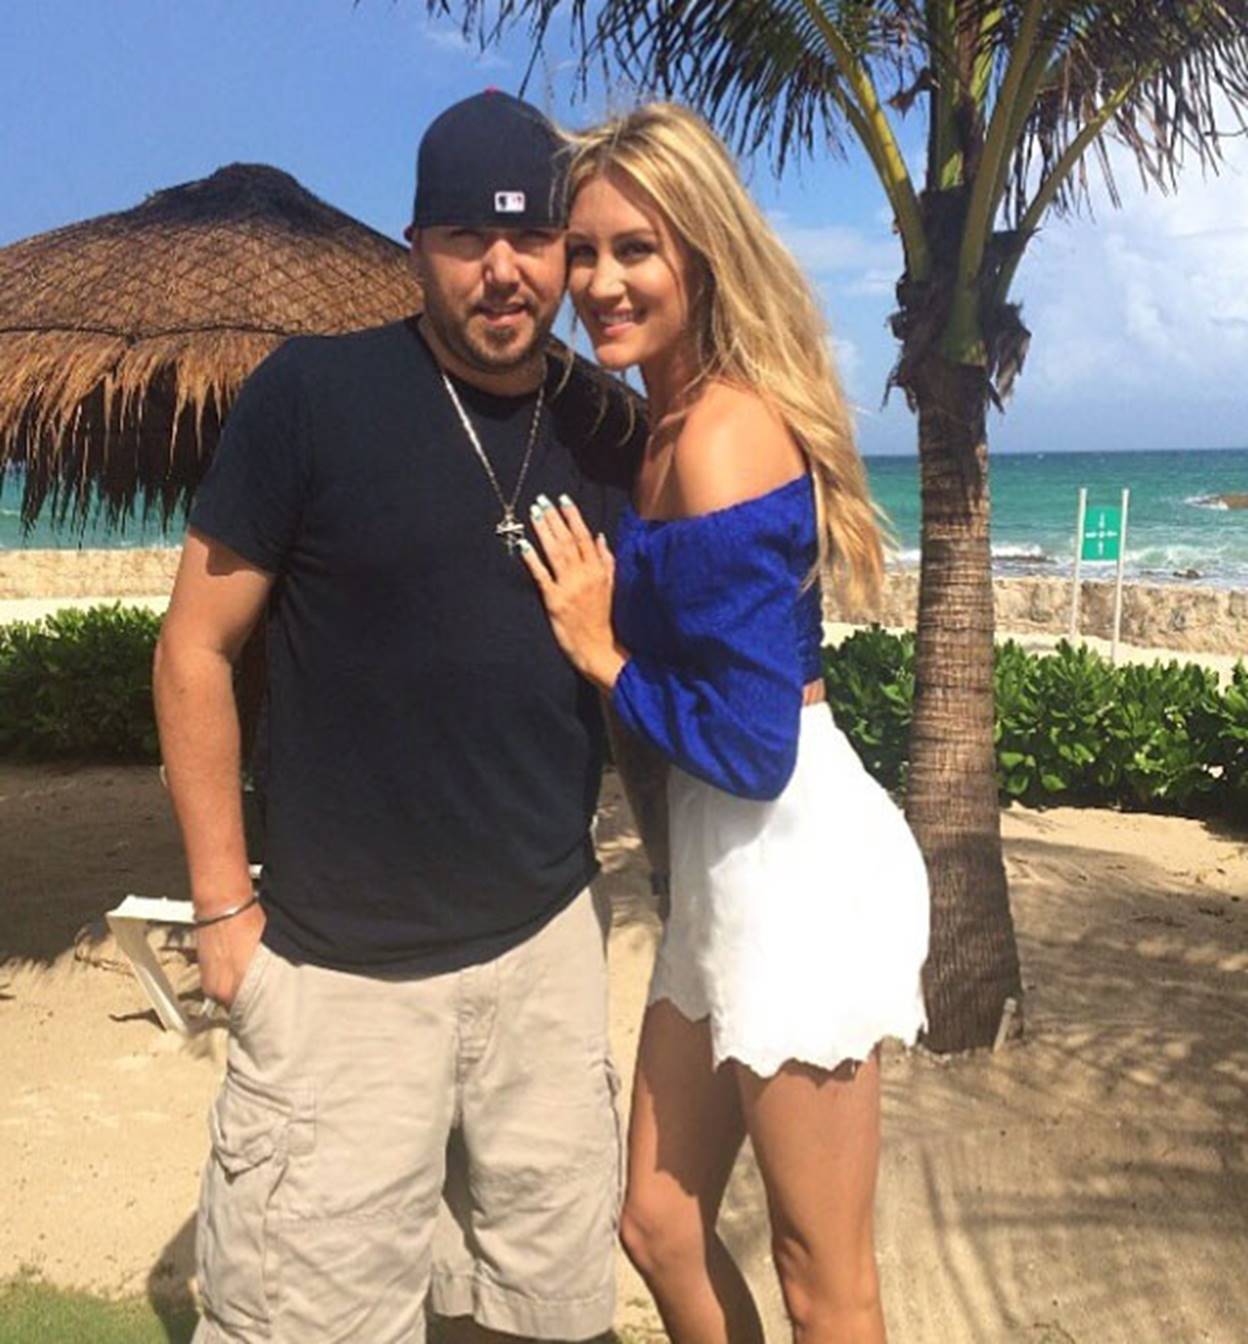 Jason Aldean and wife Brittany Kerr